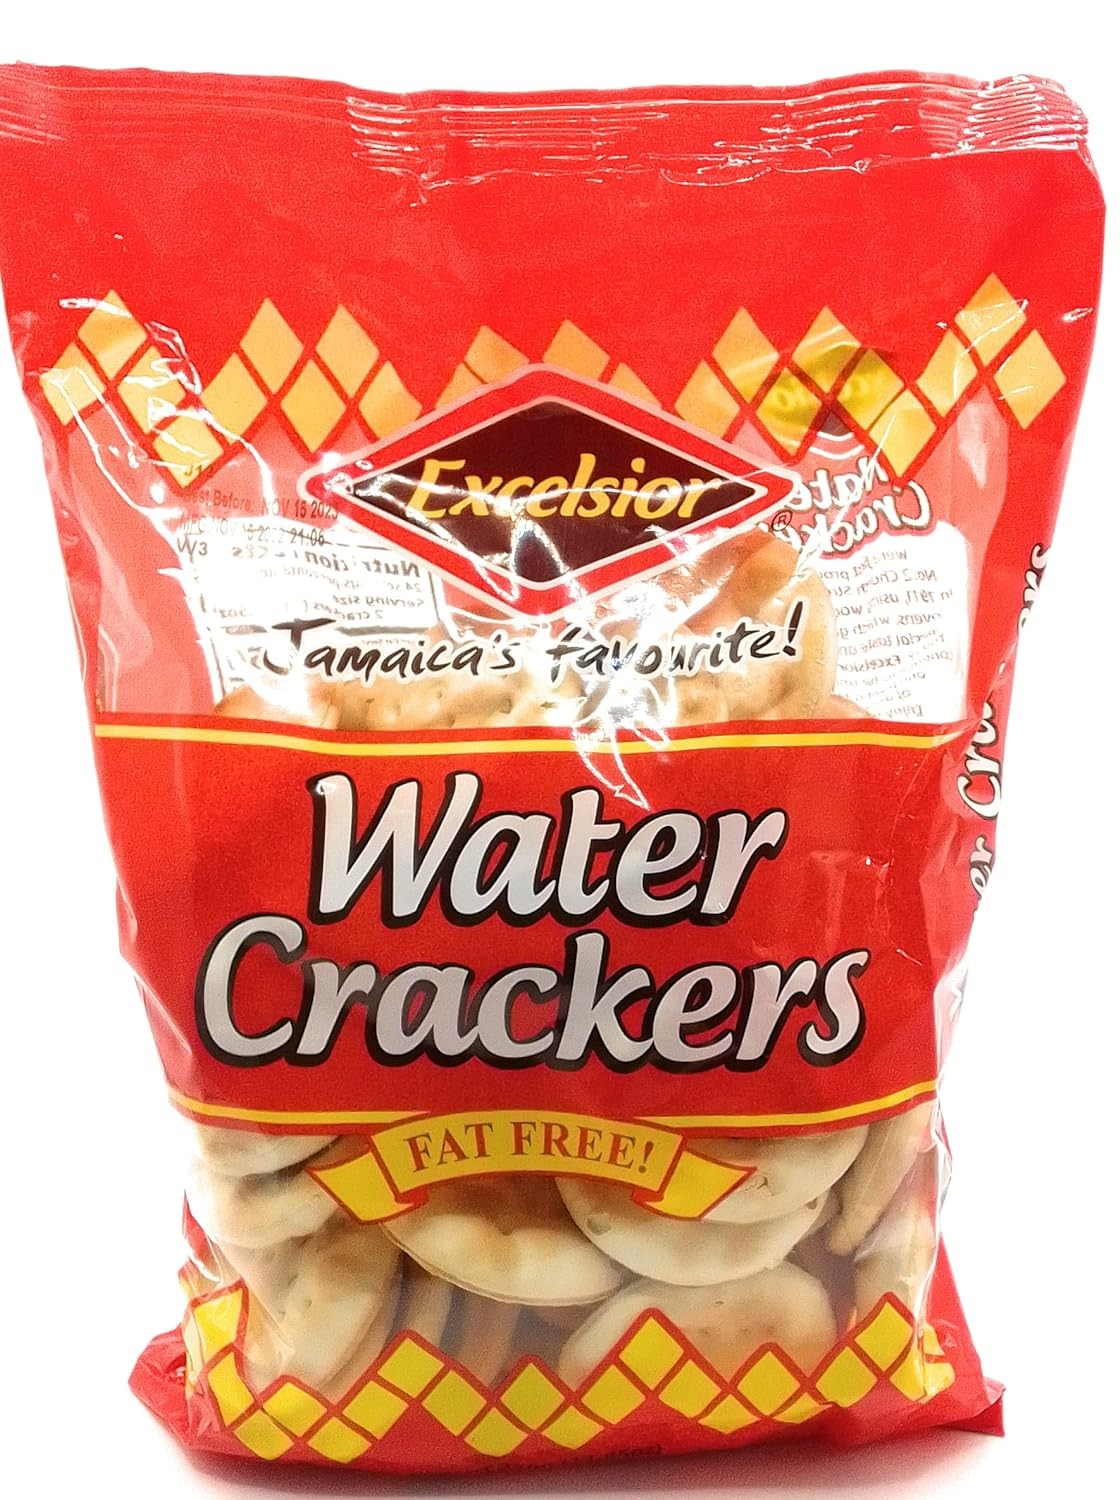 Excelsior Water Crackers, 11.85 Oz/336g